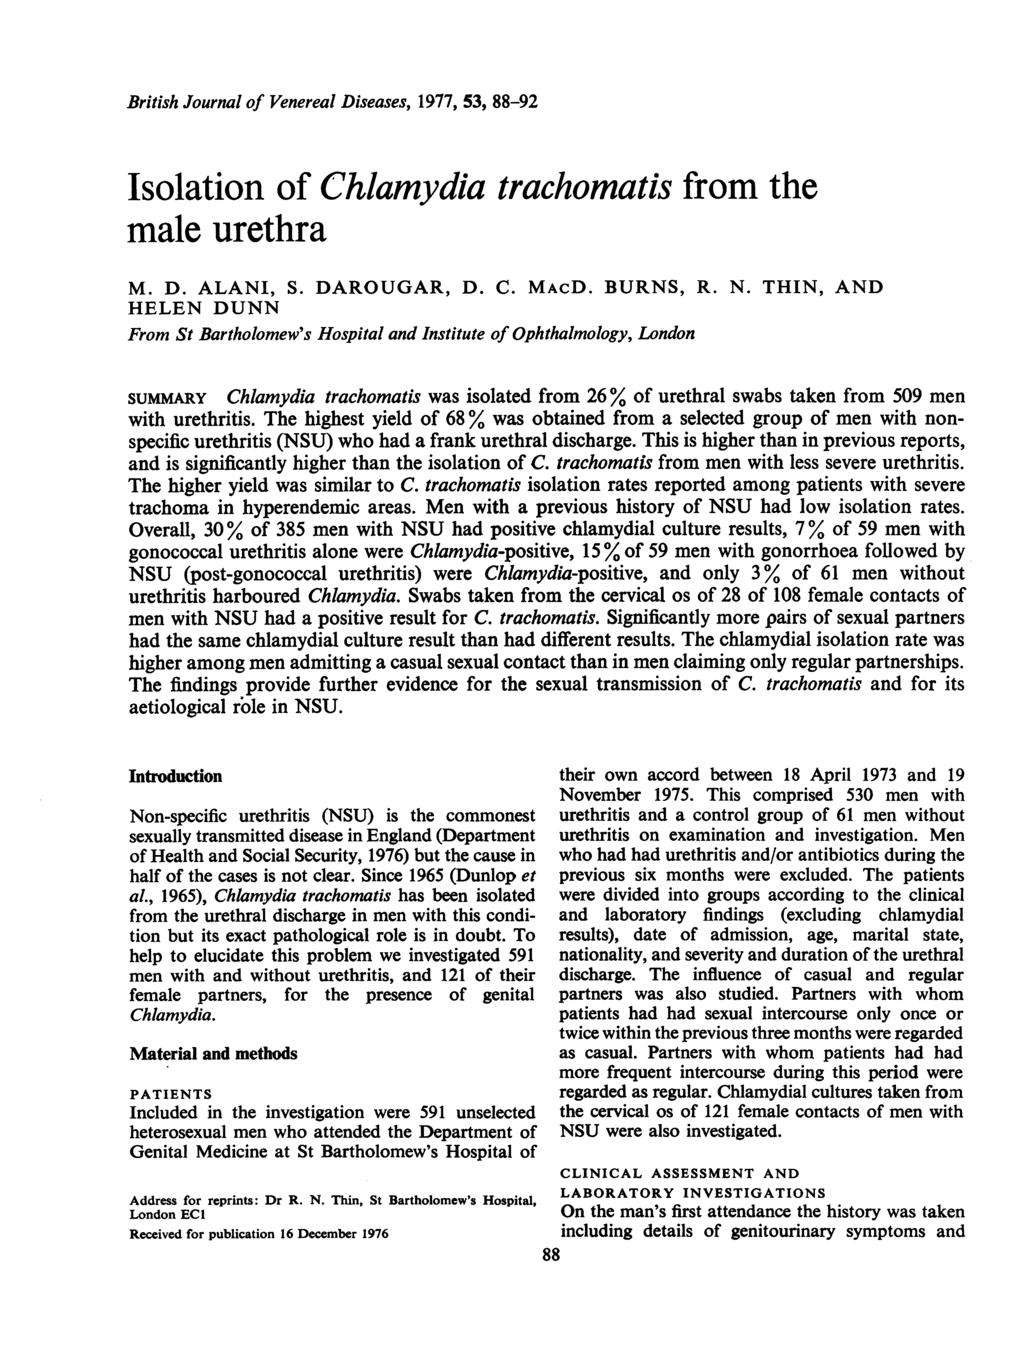 British Journal of Venereal Diseases, 1977, 53, 88-92 Isolation of Chlamydia trachomatis from the male urethra M. D. ALANI, S. DAROUGAR, D. C. MAcD. BURNS, R. N.